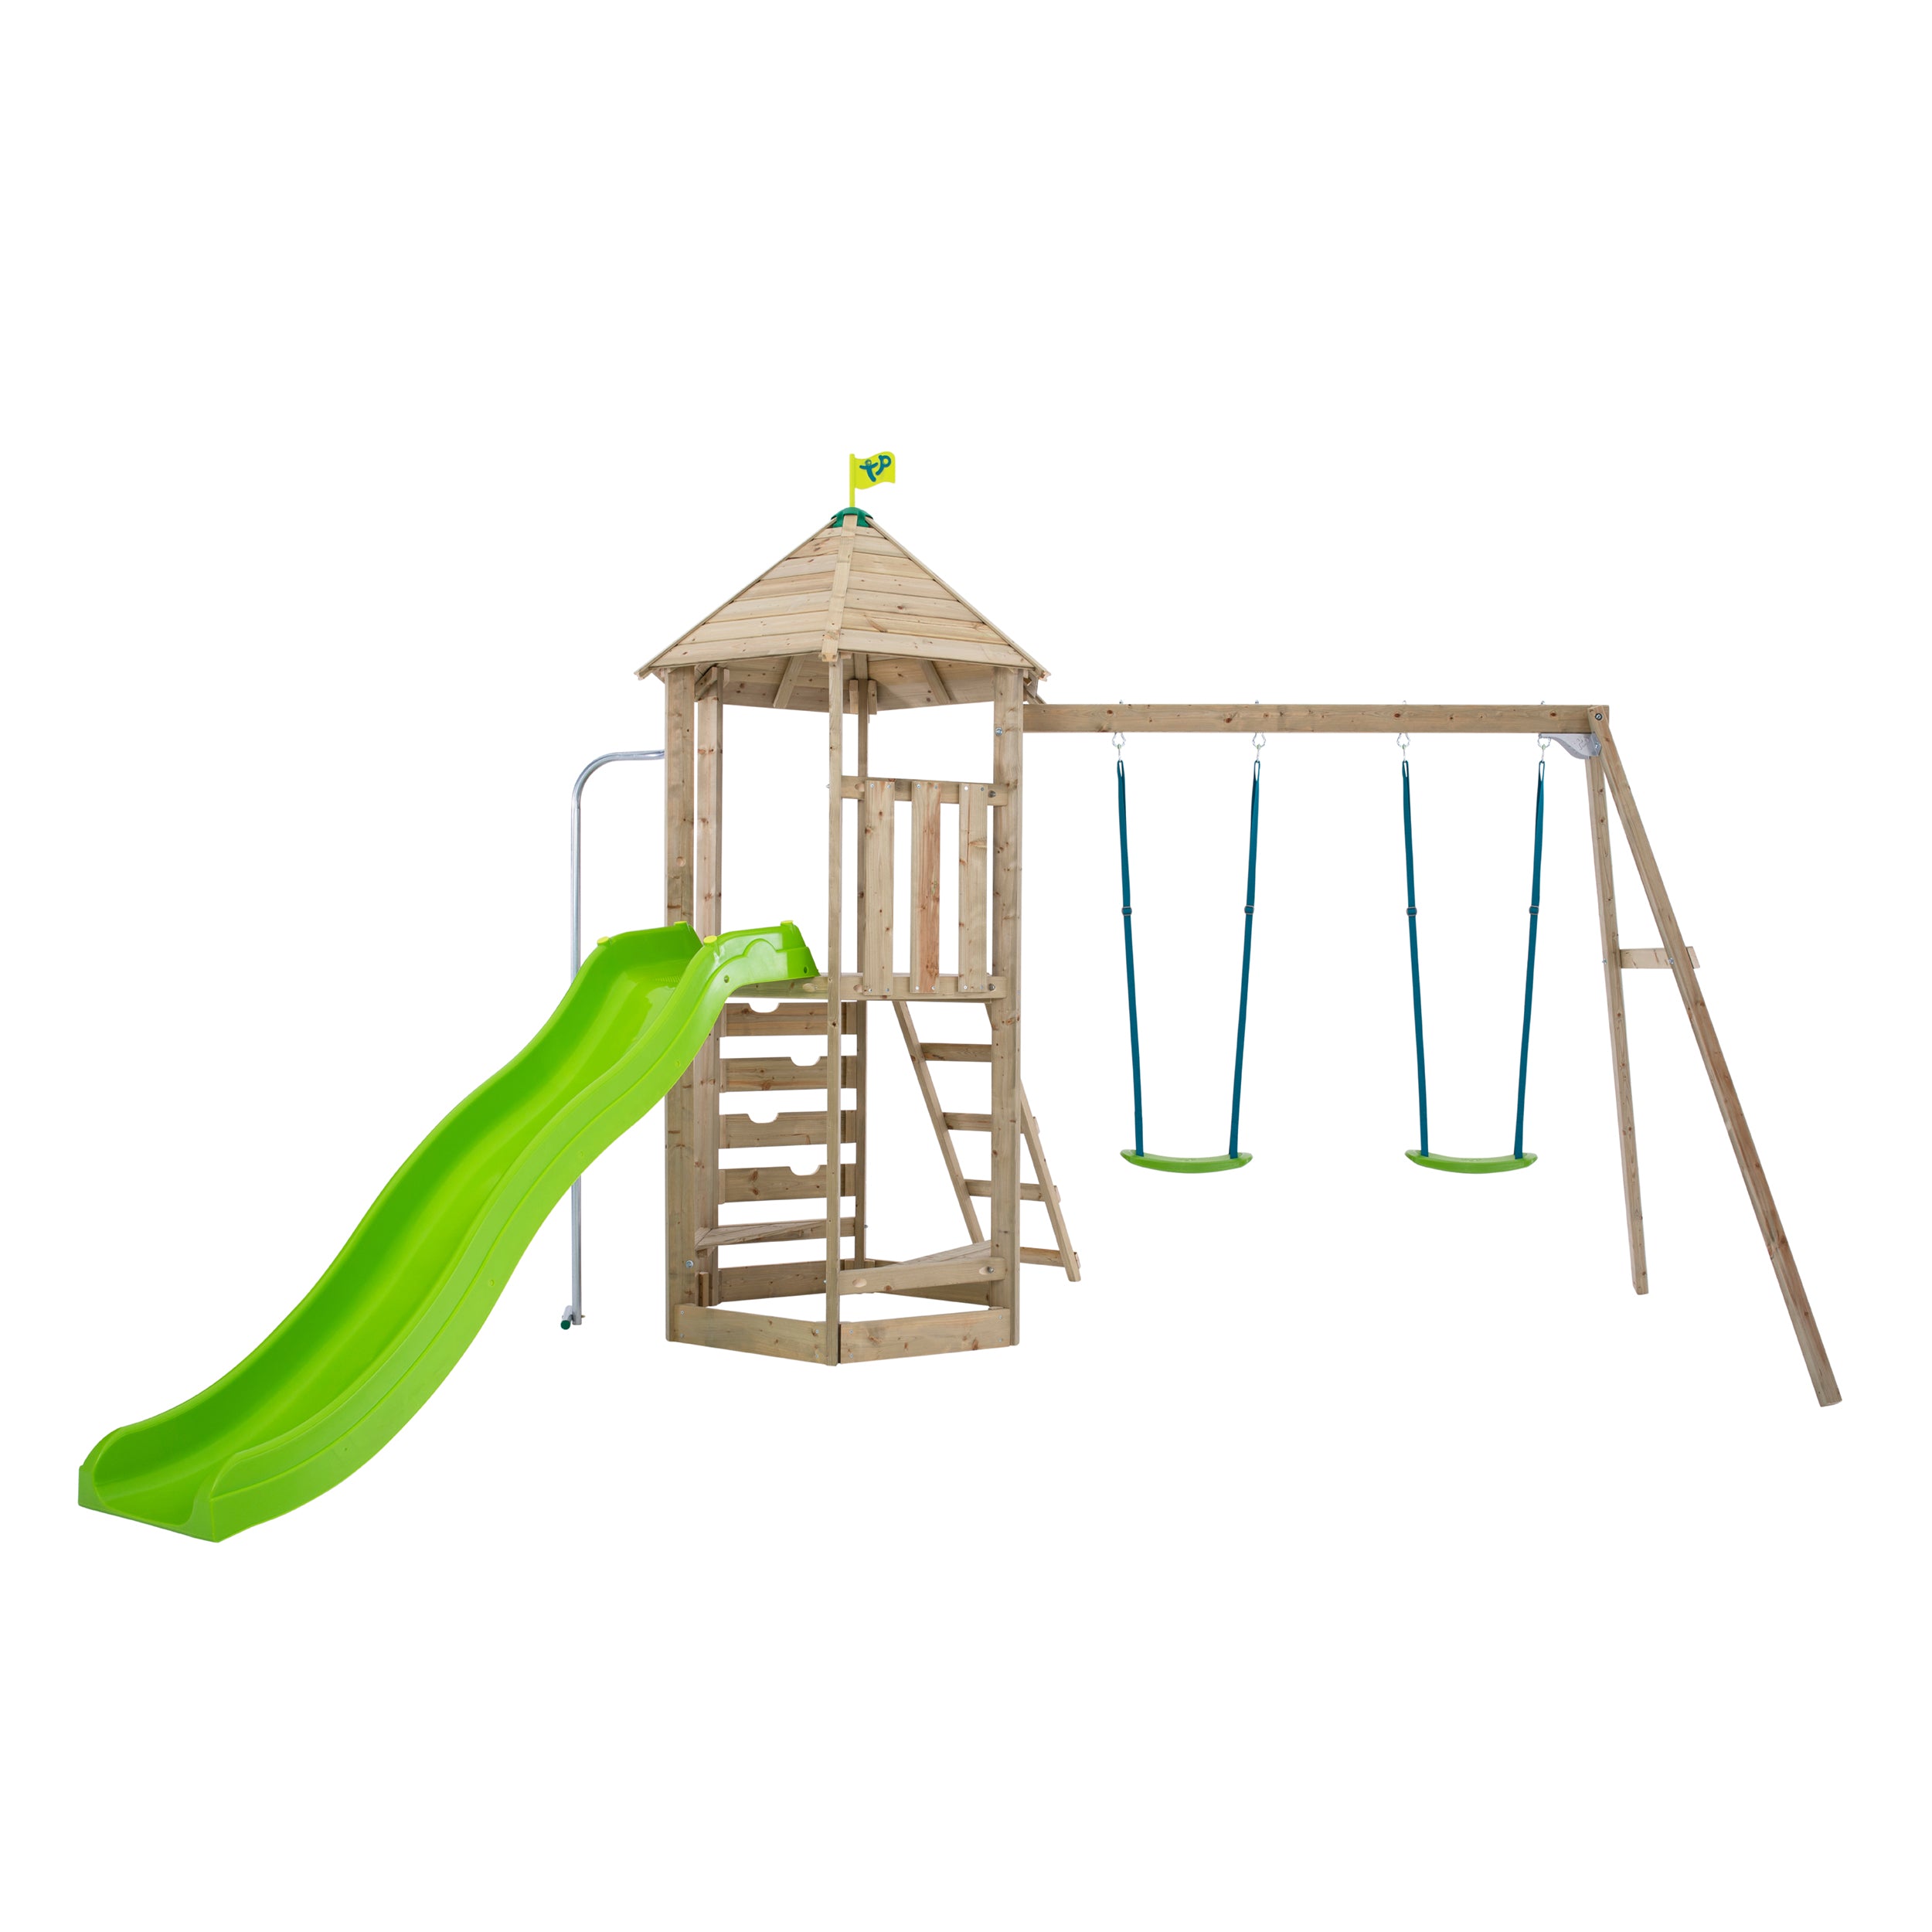 TP Castlewood Beeston Wooden Climbing Frame with Swing Set & Slide - FSC<sup>®</sup> certified